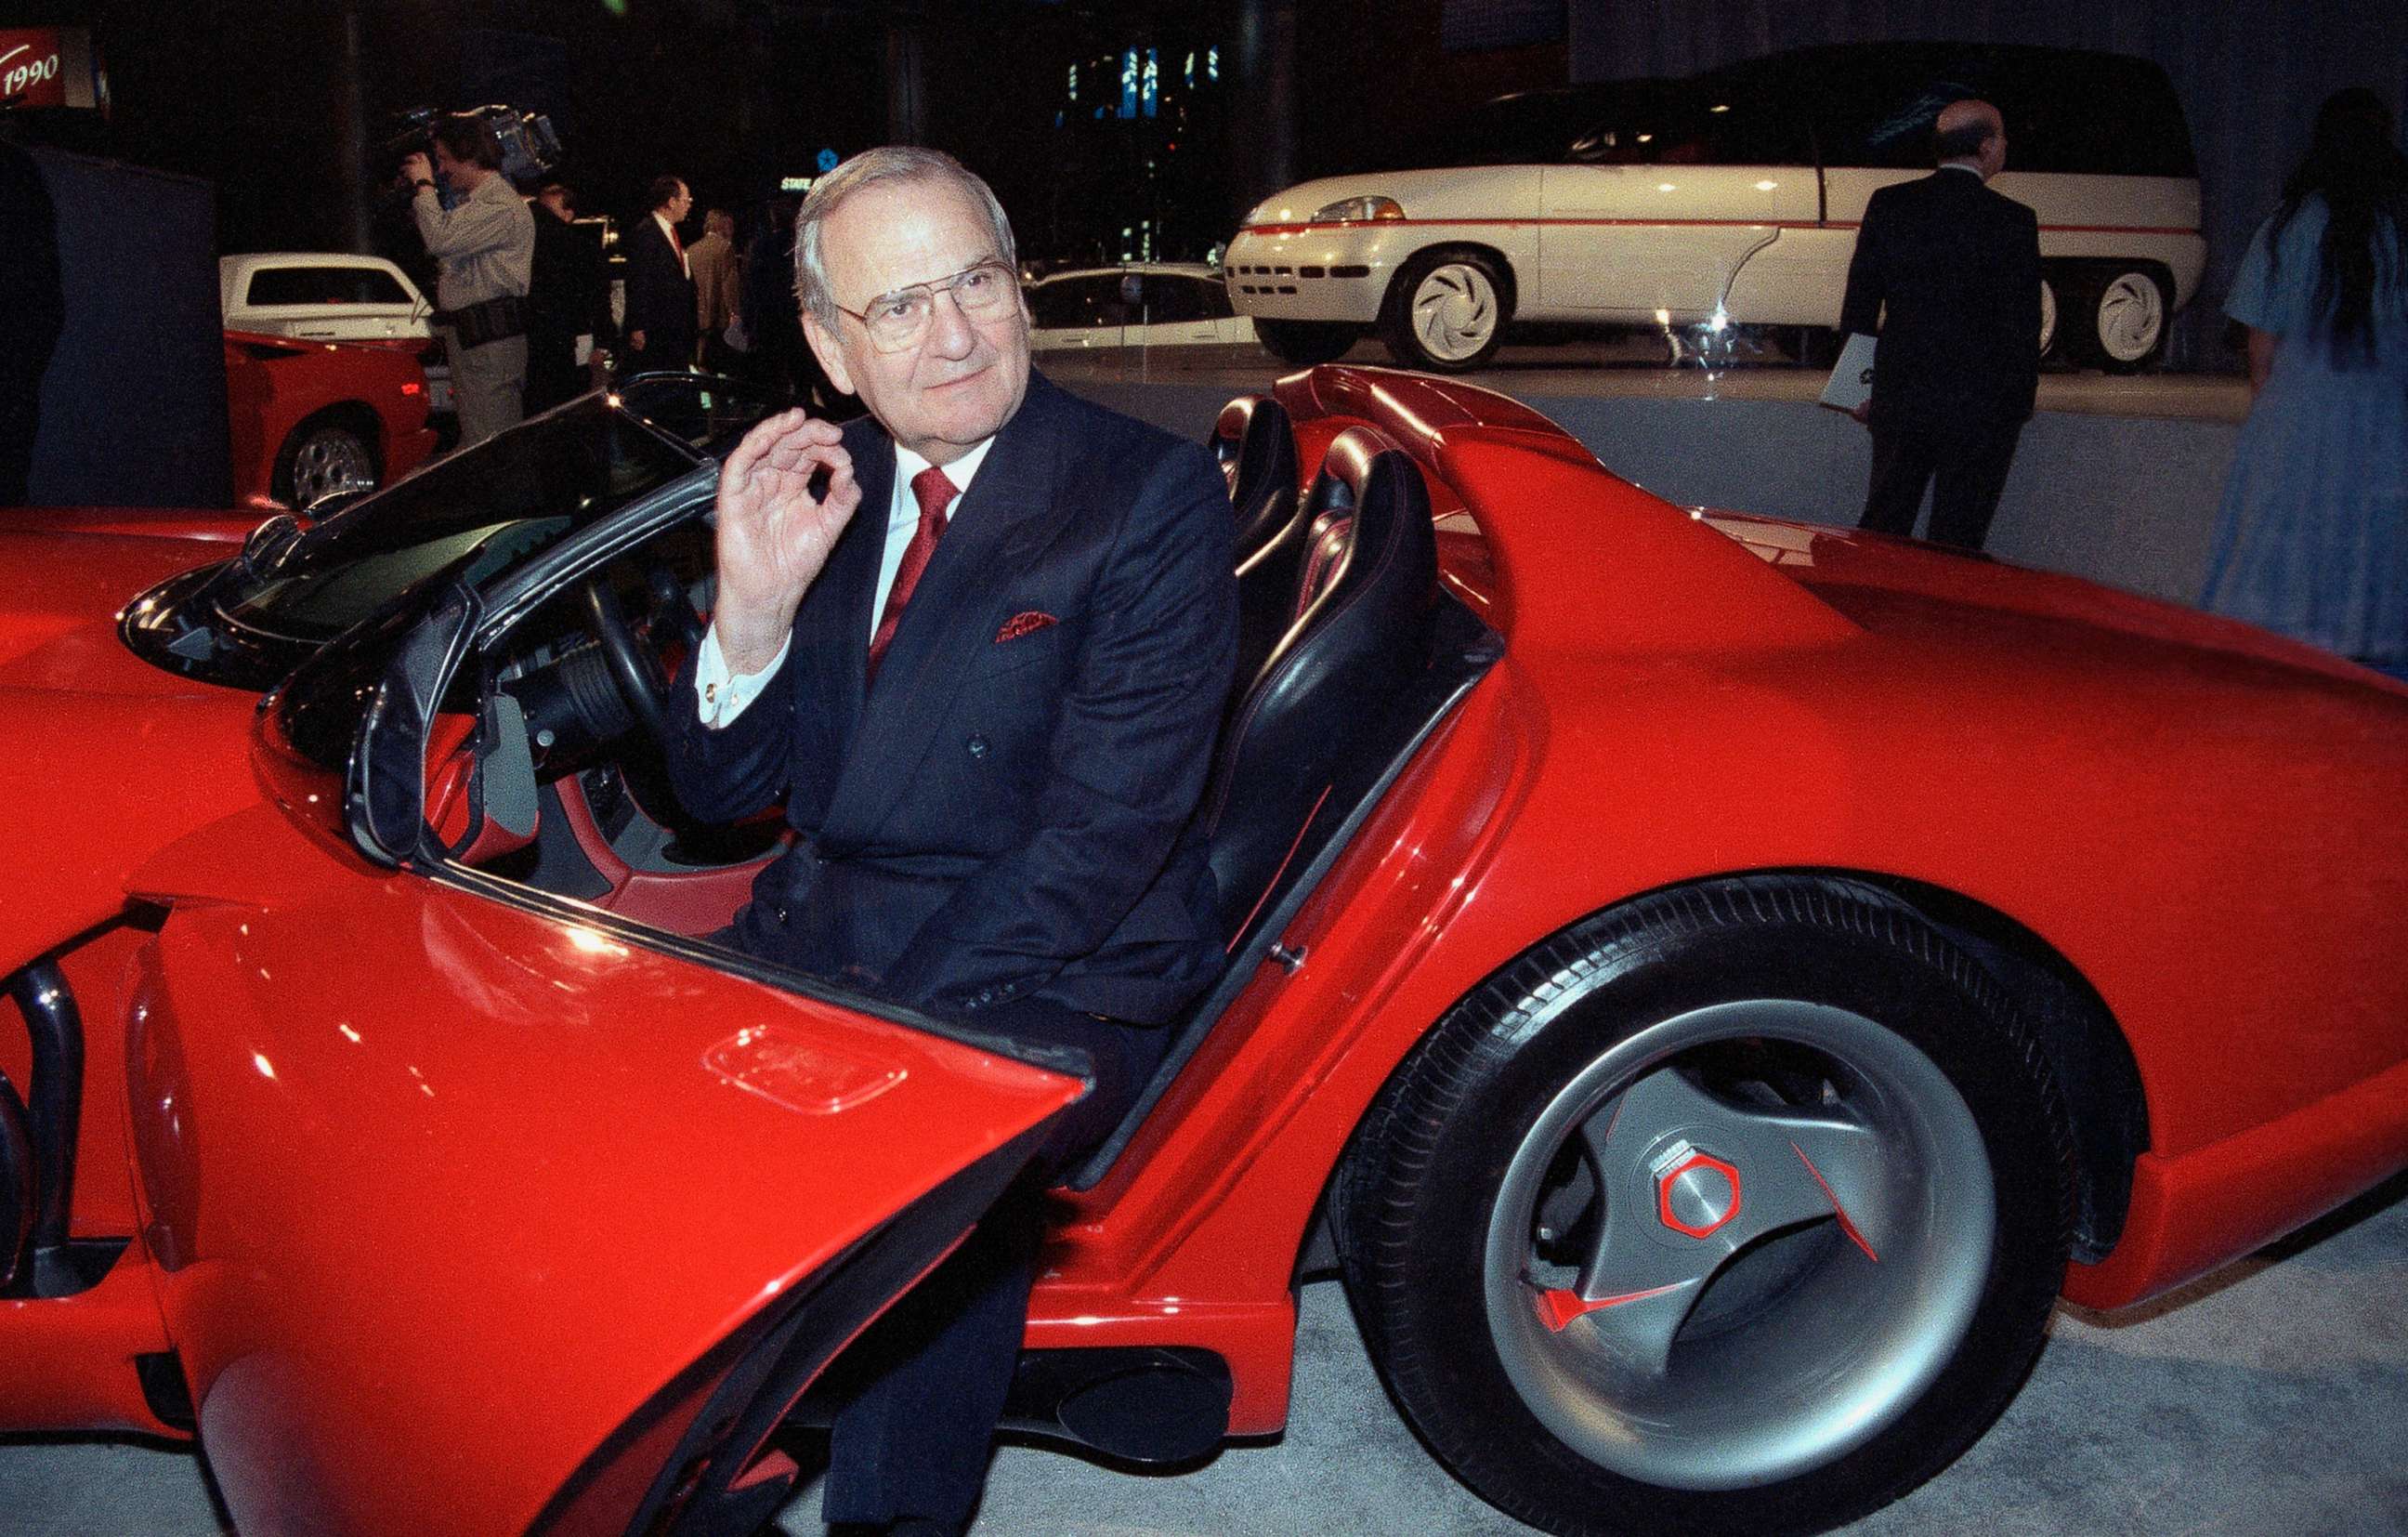 PHOTO: Chrysler Corporation Chairman Lee Iacocca sits in a 1990 Dodge Viper sports car, March 28, 1990, in New York City.